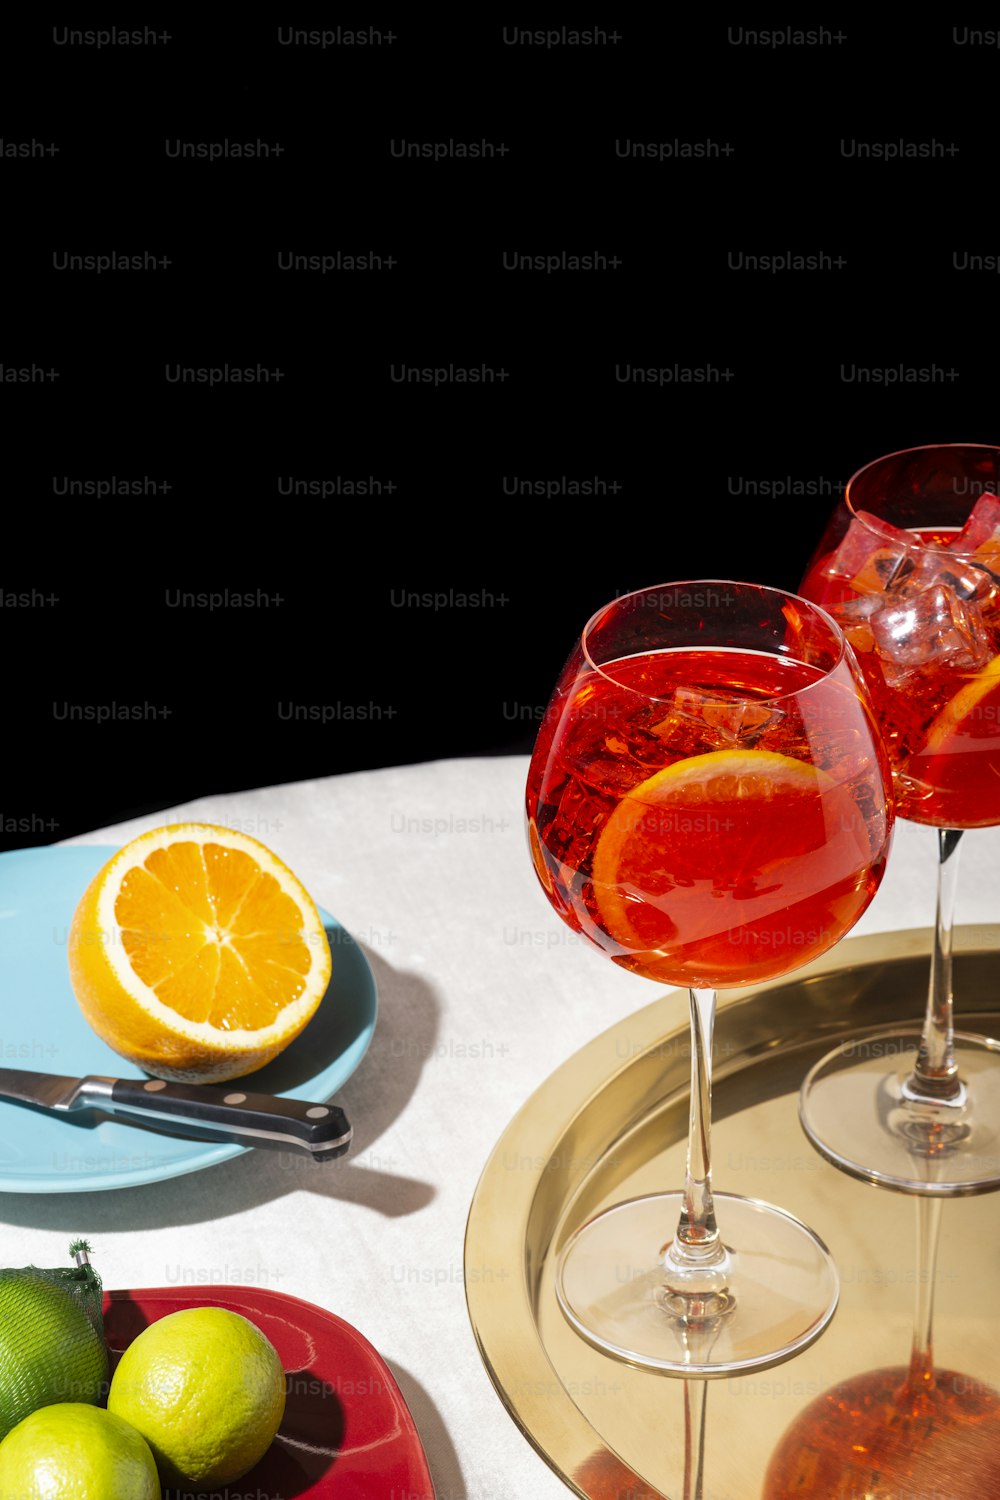 Spritz veneziano, an IBA cocktail, with Prosecco or white sparkling wine, bitter, soda, ice and a slice of orange, in a calix on a table, pop graphic style